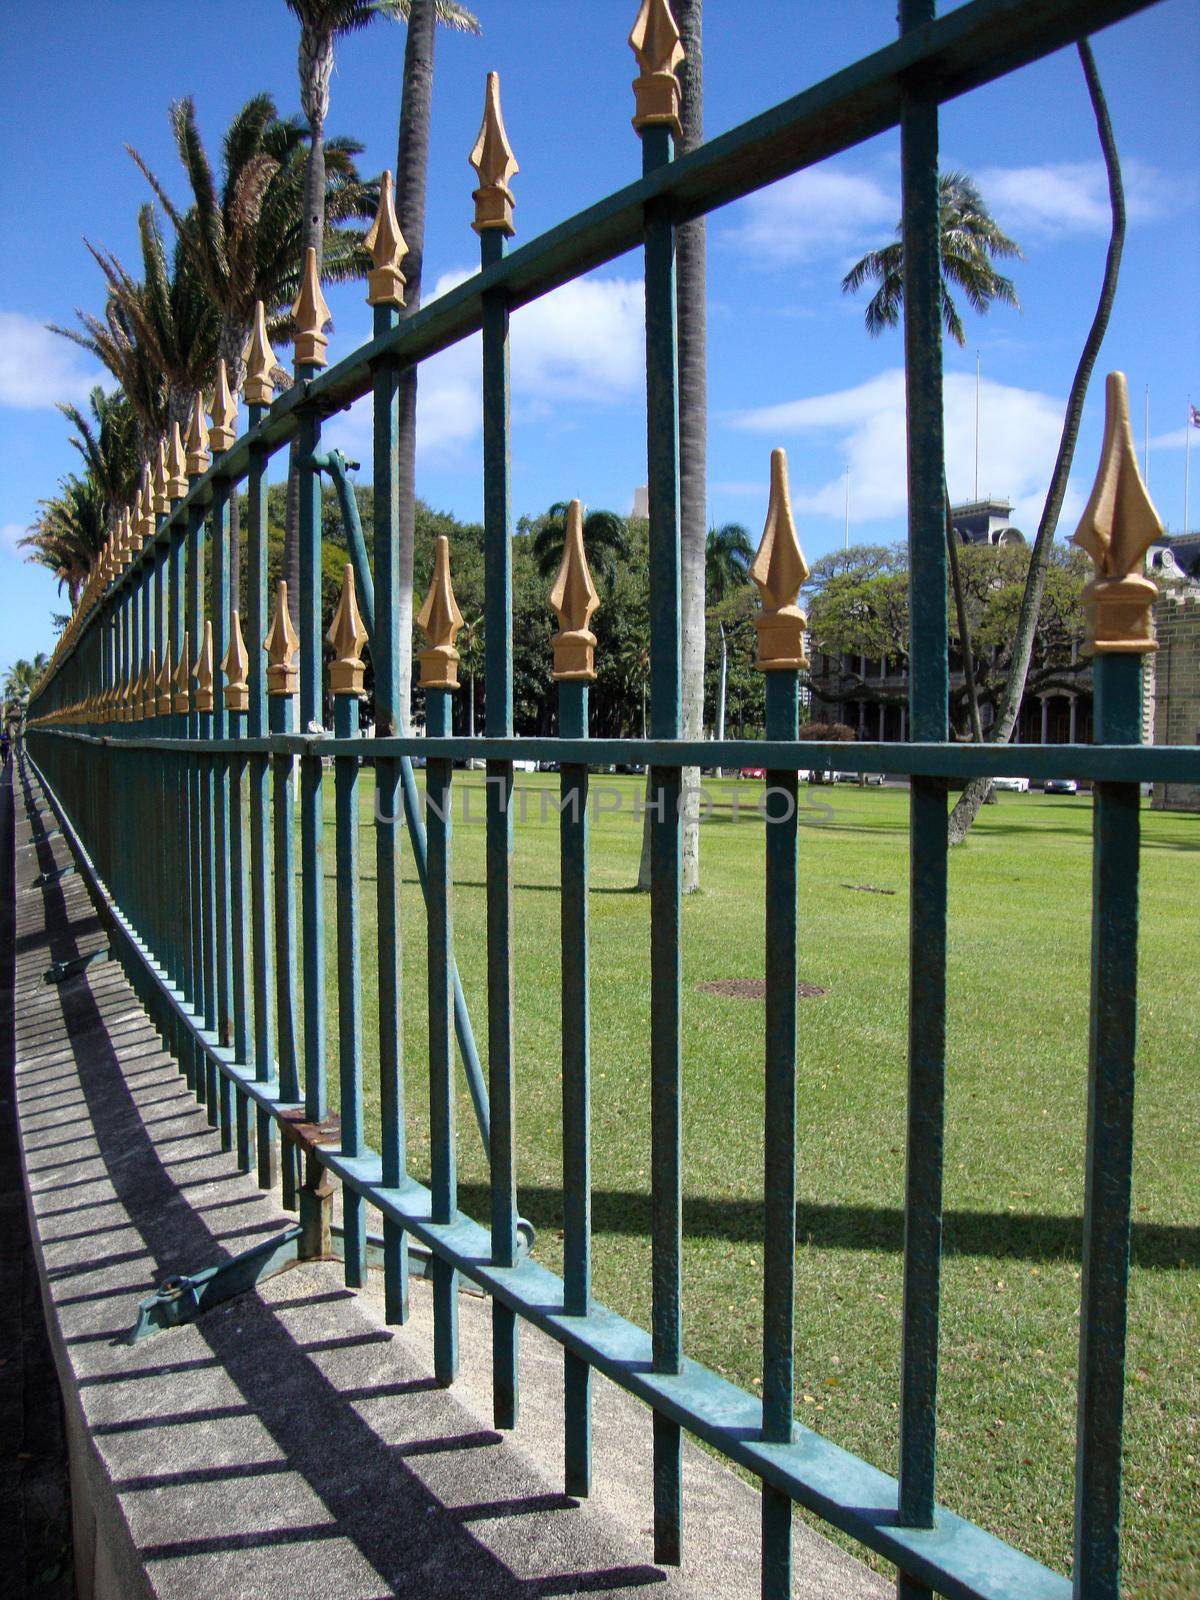 Iolani Palace Fence is a half mile ornamental fence that surrounds the palace grounds was built in 1892.  The fence is painted dark green and the spikes are gilded in gold paint.  The fence was built by Champion Iron Co. of Toledo, Ohio uses no welding held together with post and screws.